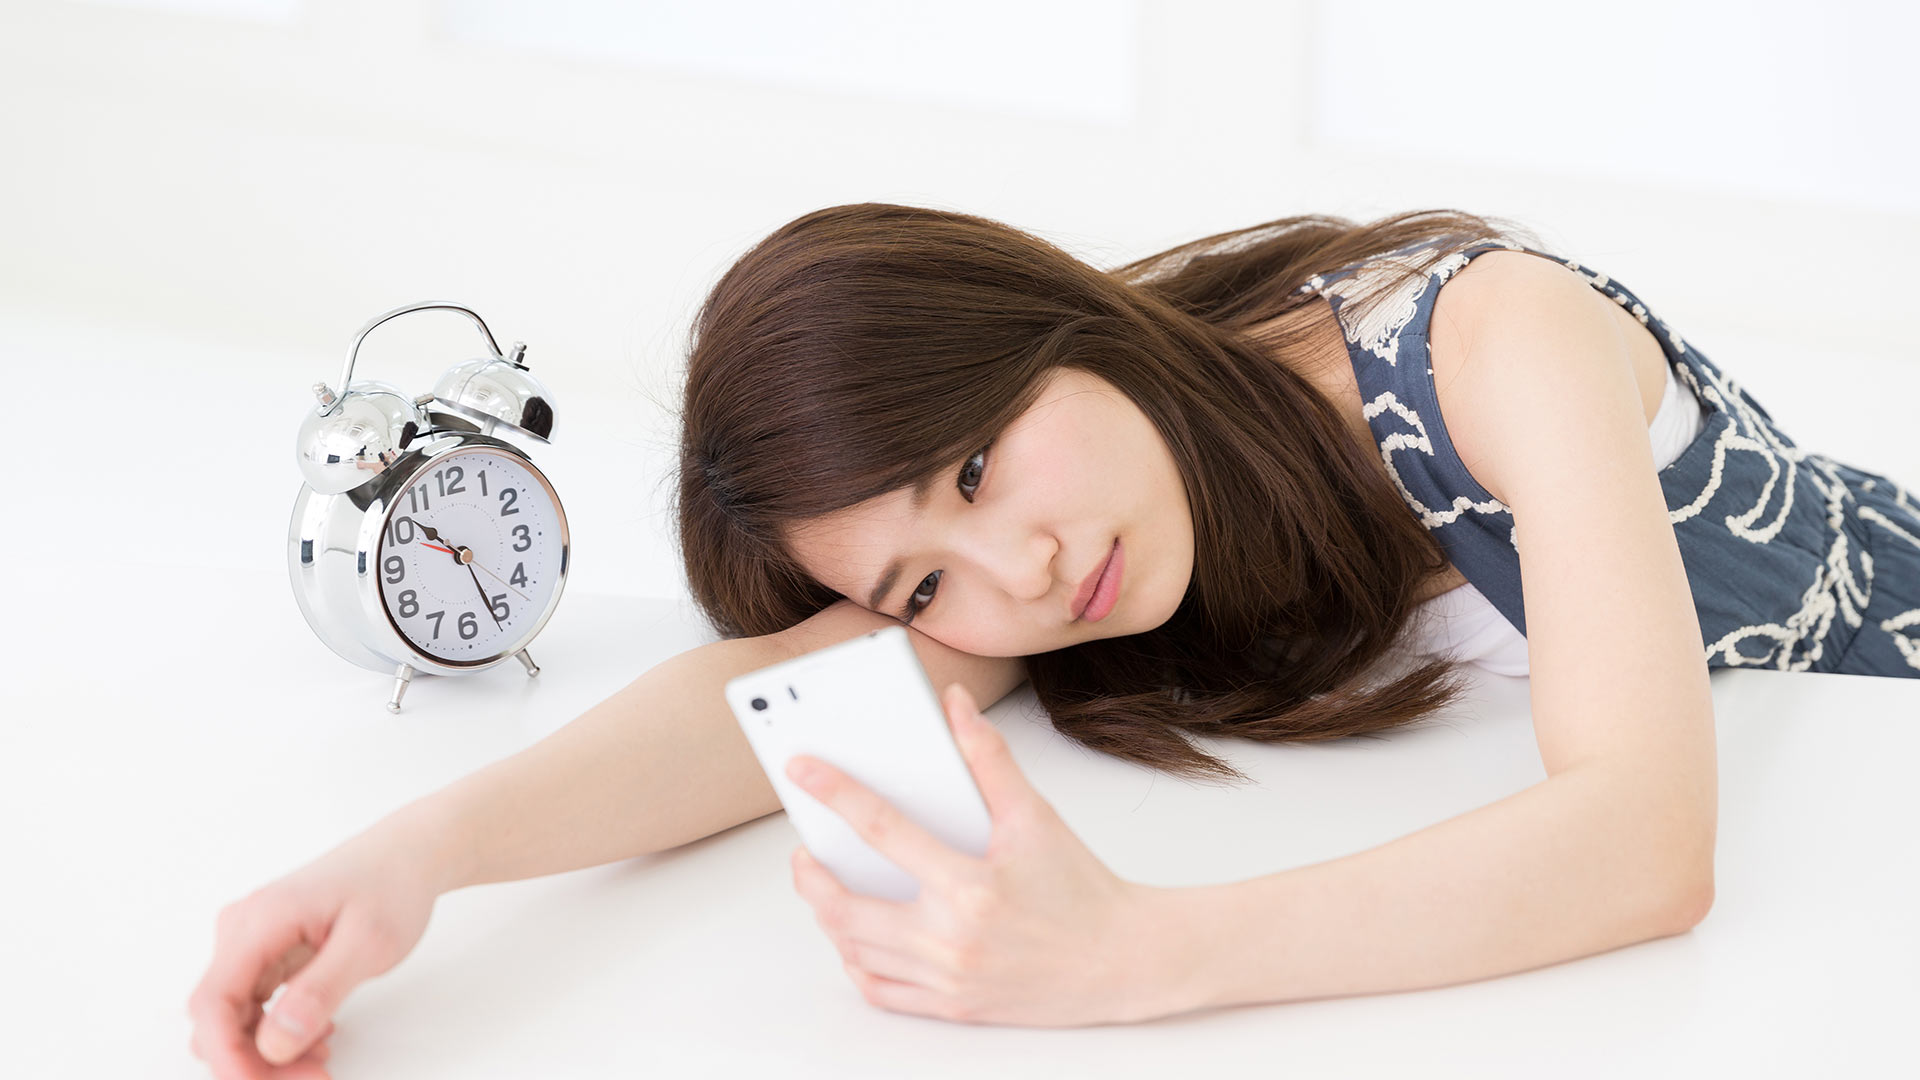 Brunette woman lying on a white desk with an alarm clock next to her, looking at her phone expectantly.